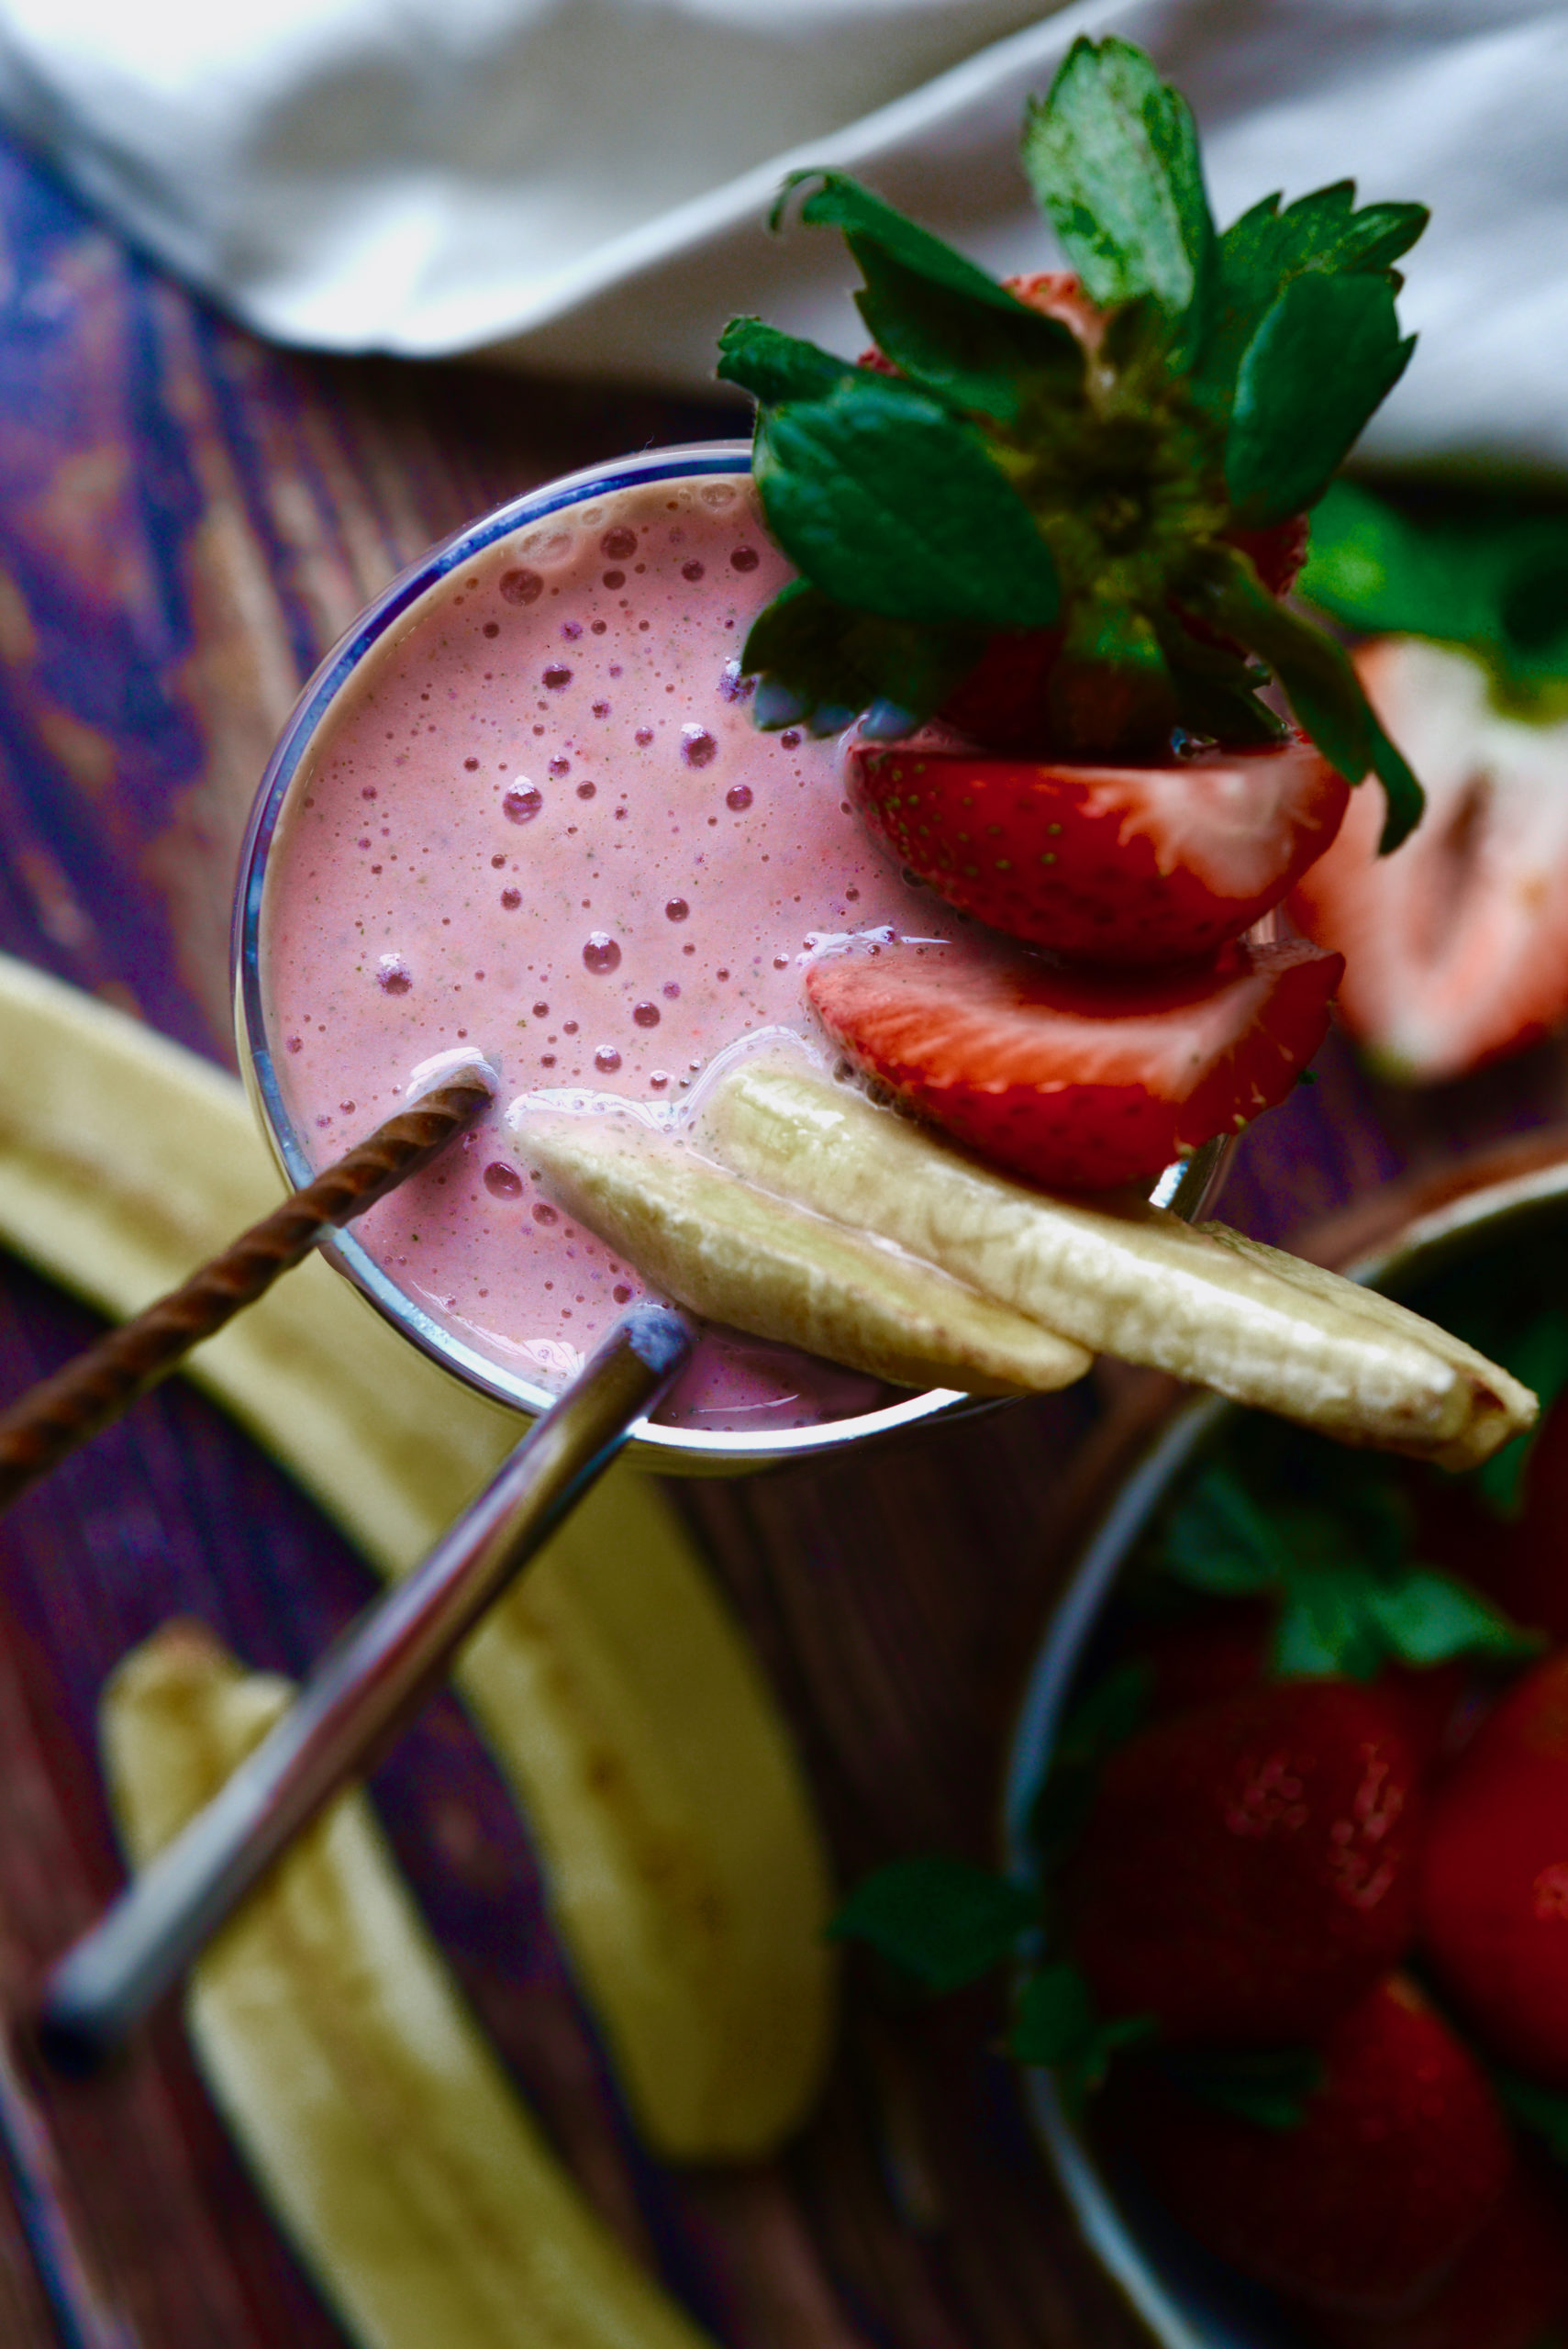 3-ingredient strawberry banana smoothie, areal shot of smoothie in glass with fruit garnishes, straw, and spoon